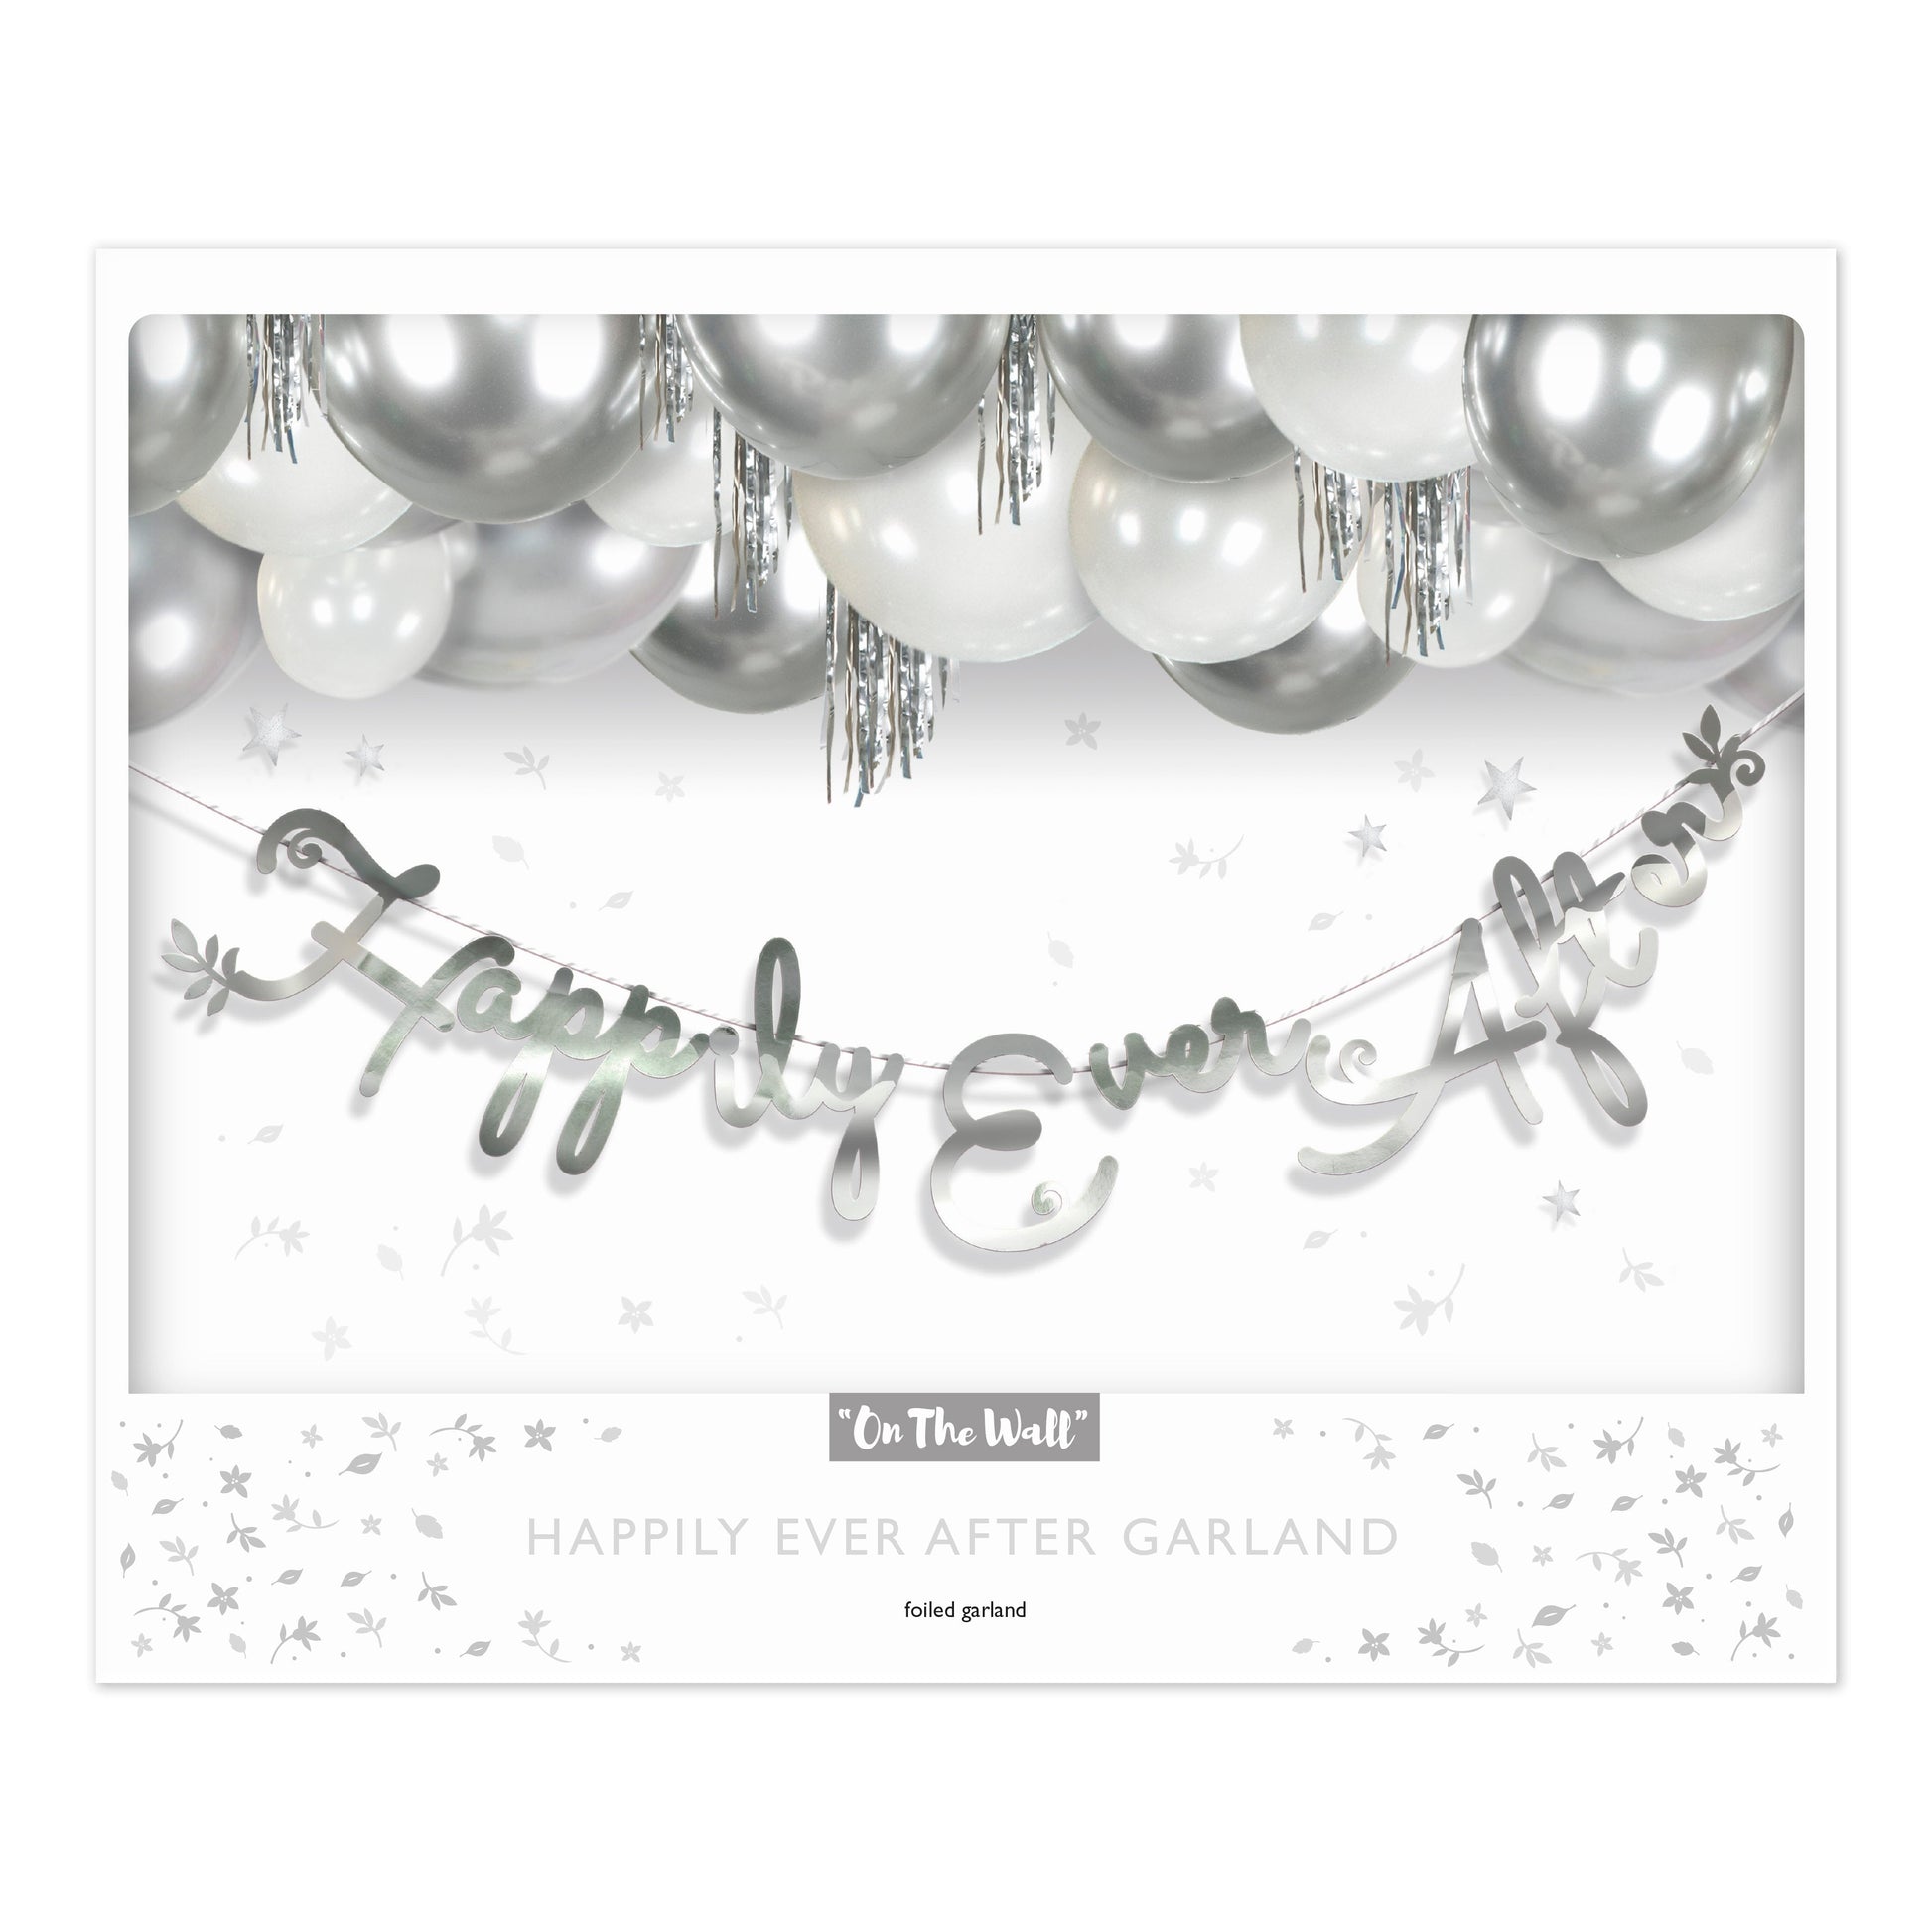 Happily Ever After Stitched Garland 1